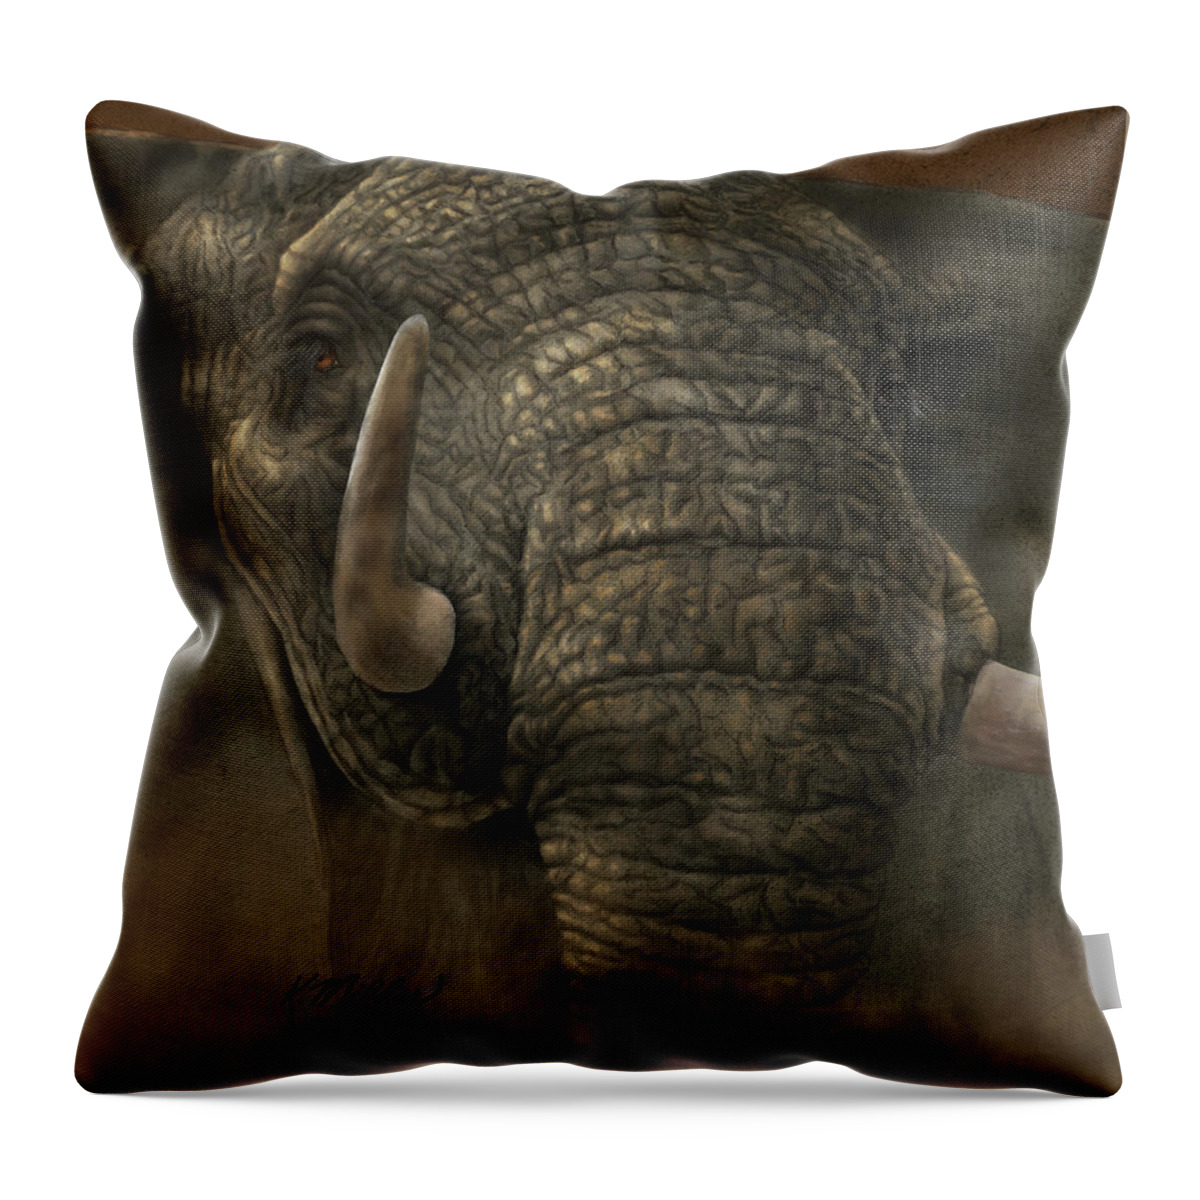 Elephant Throw Pillow featuring the digital art Charging Elephant by Kathie Miller